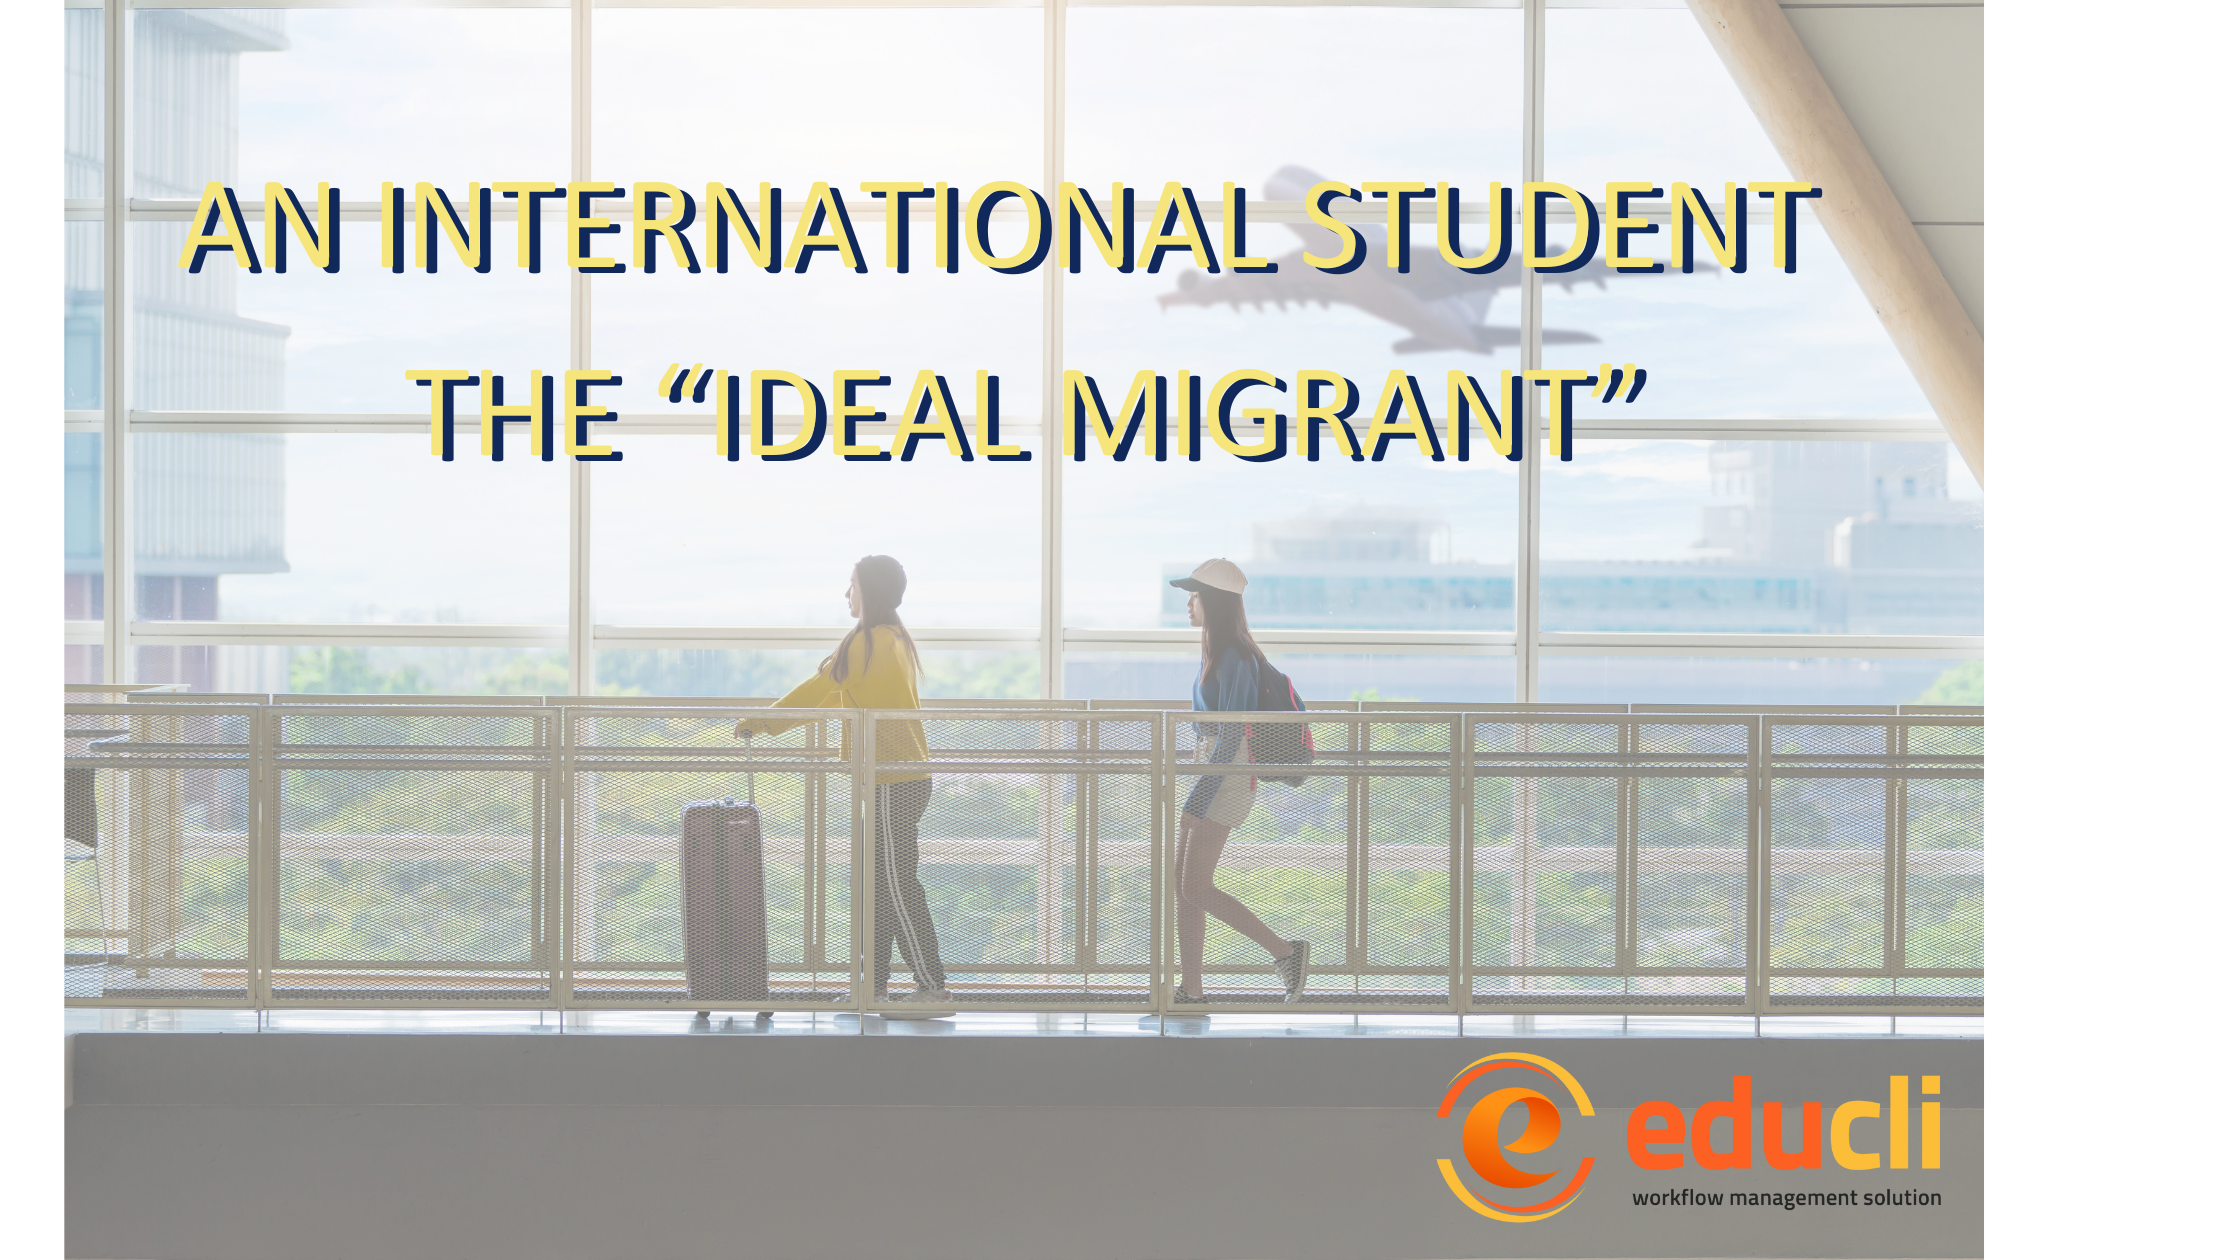 An international student ideal migrant.